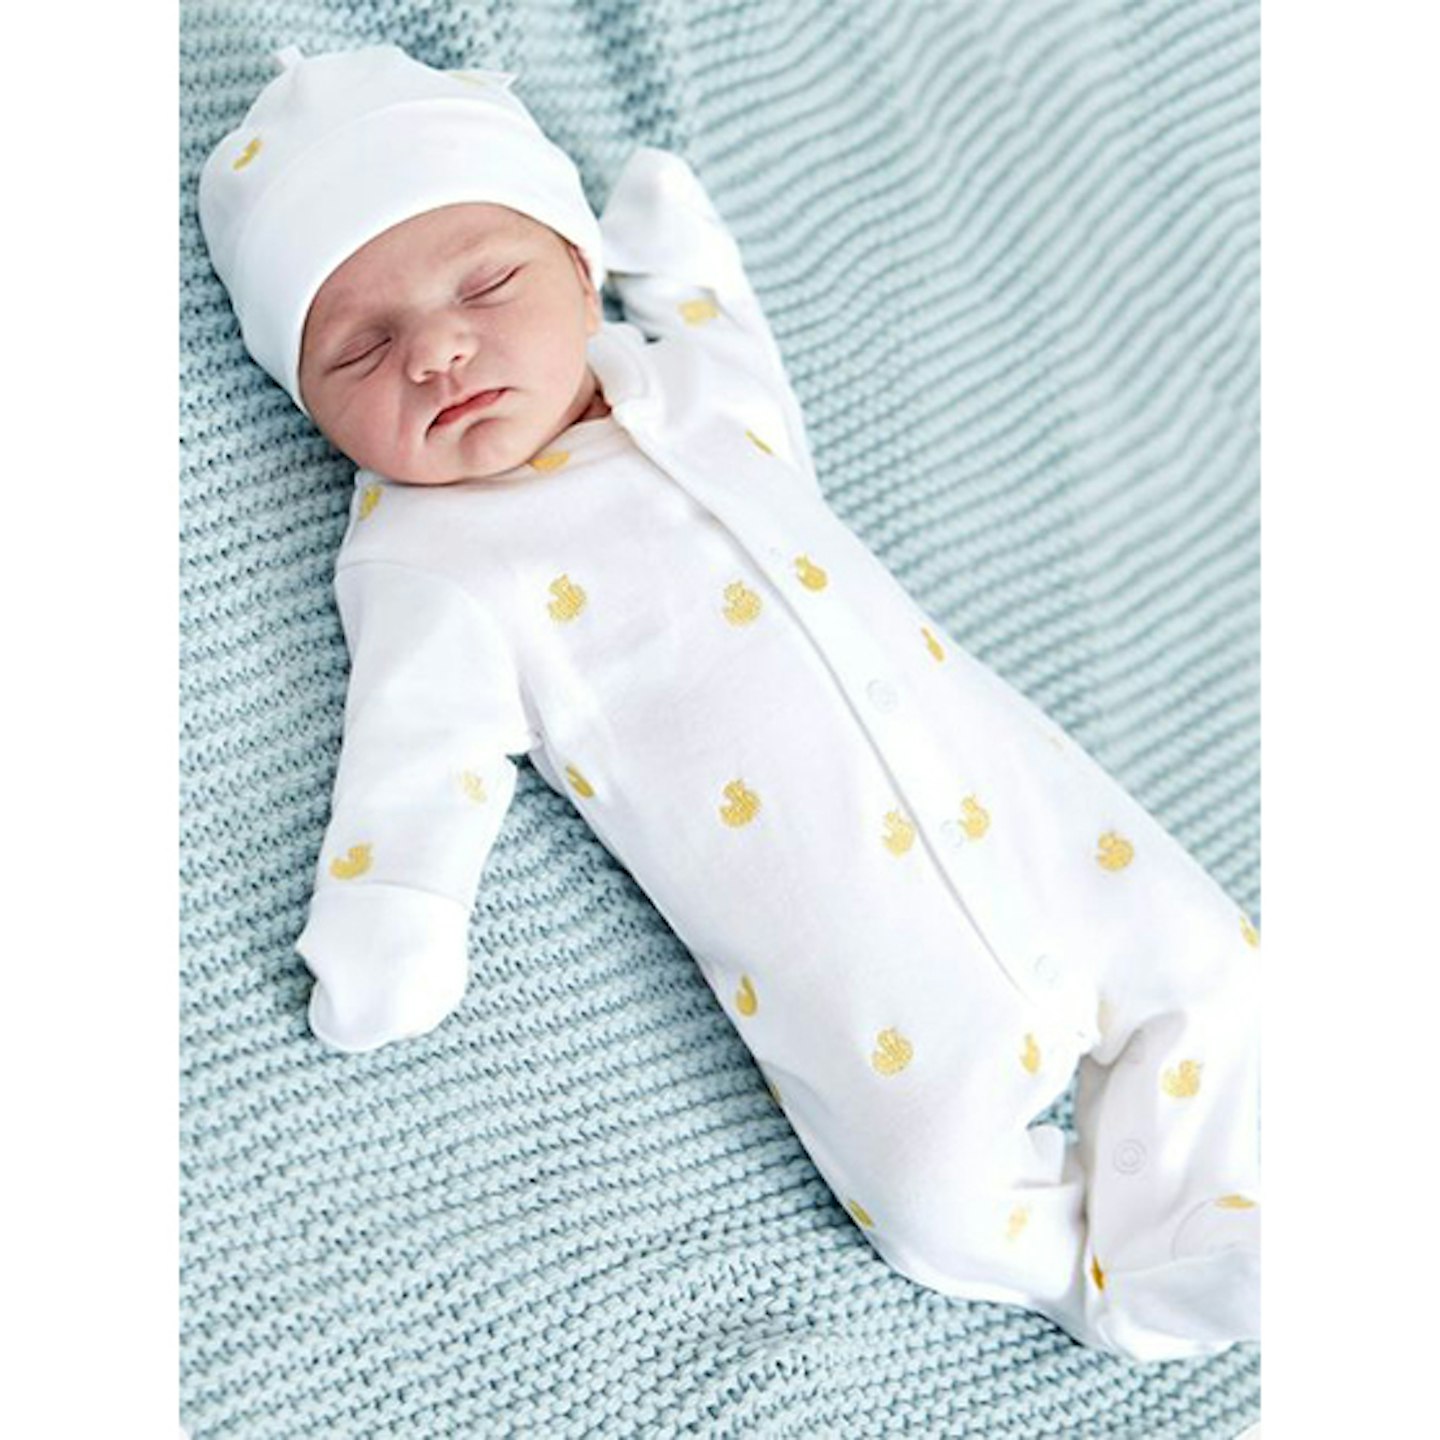 Duck baby grow with mittens